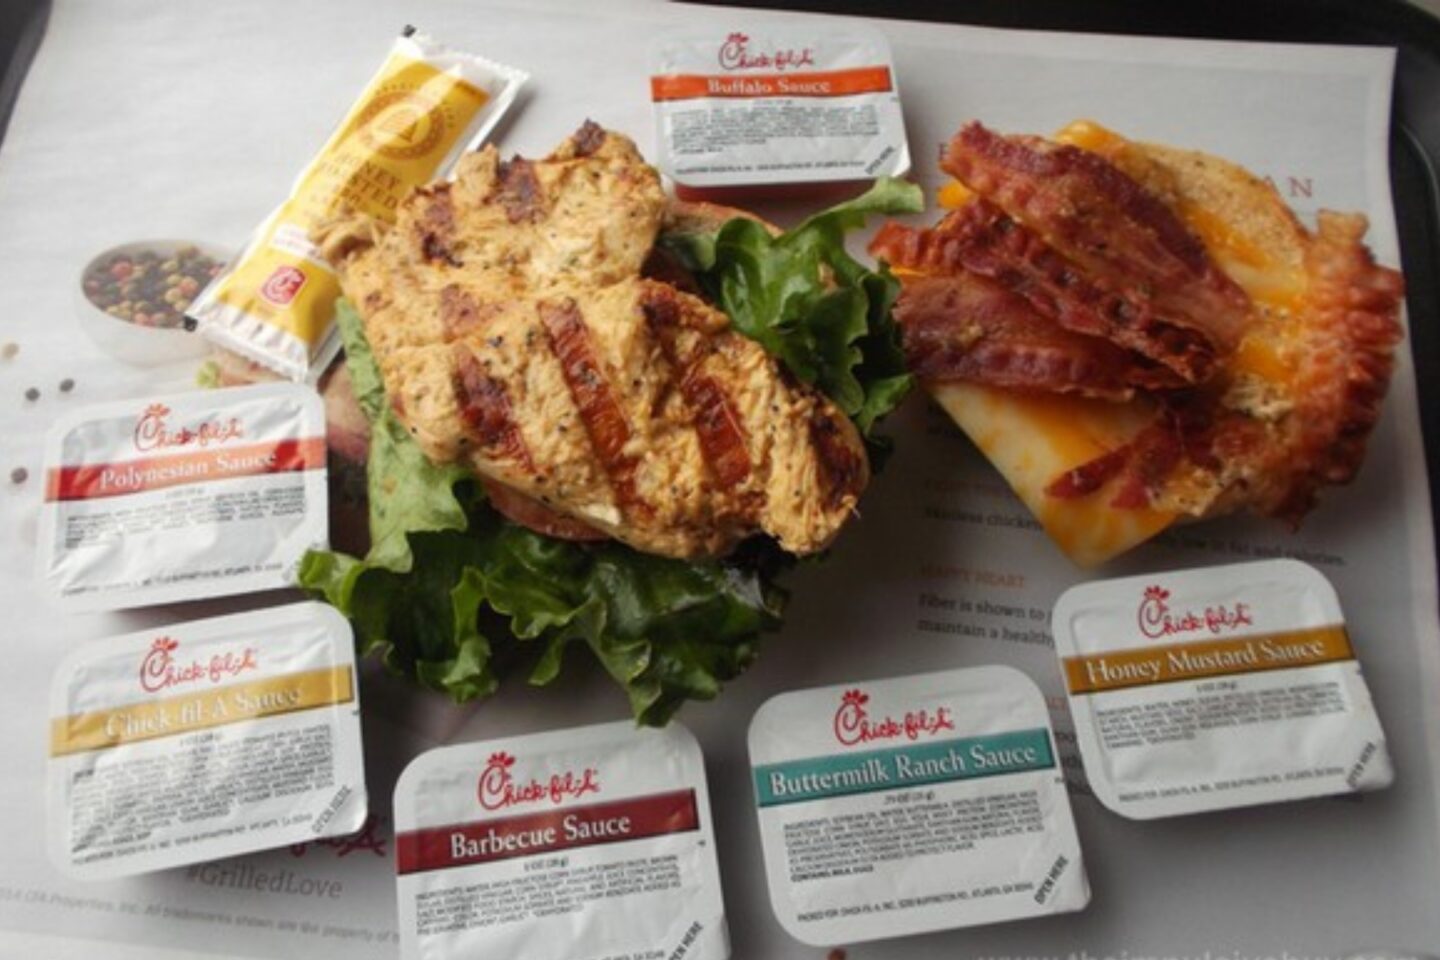 chick fil a grilled chicken sandwiches and sauces